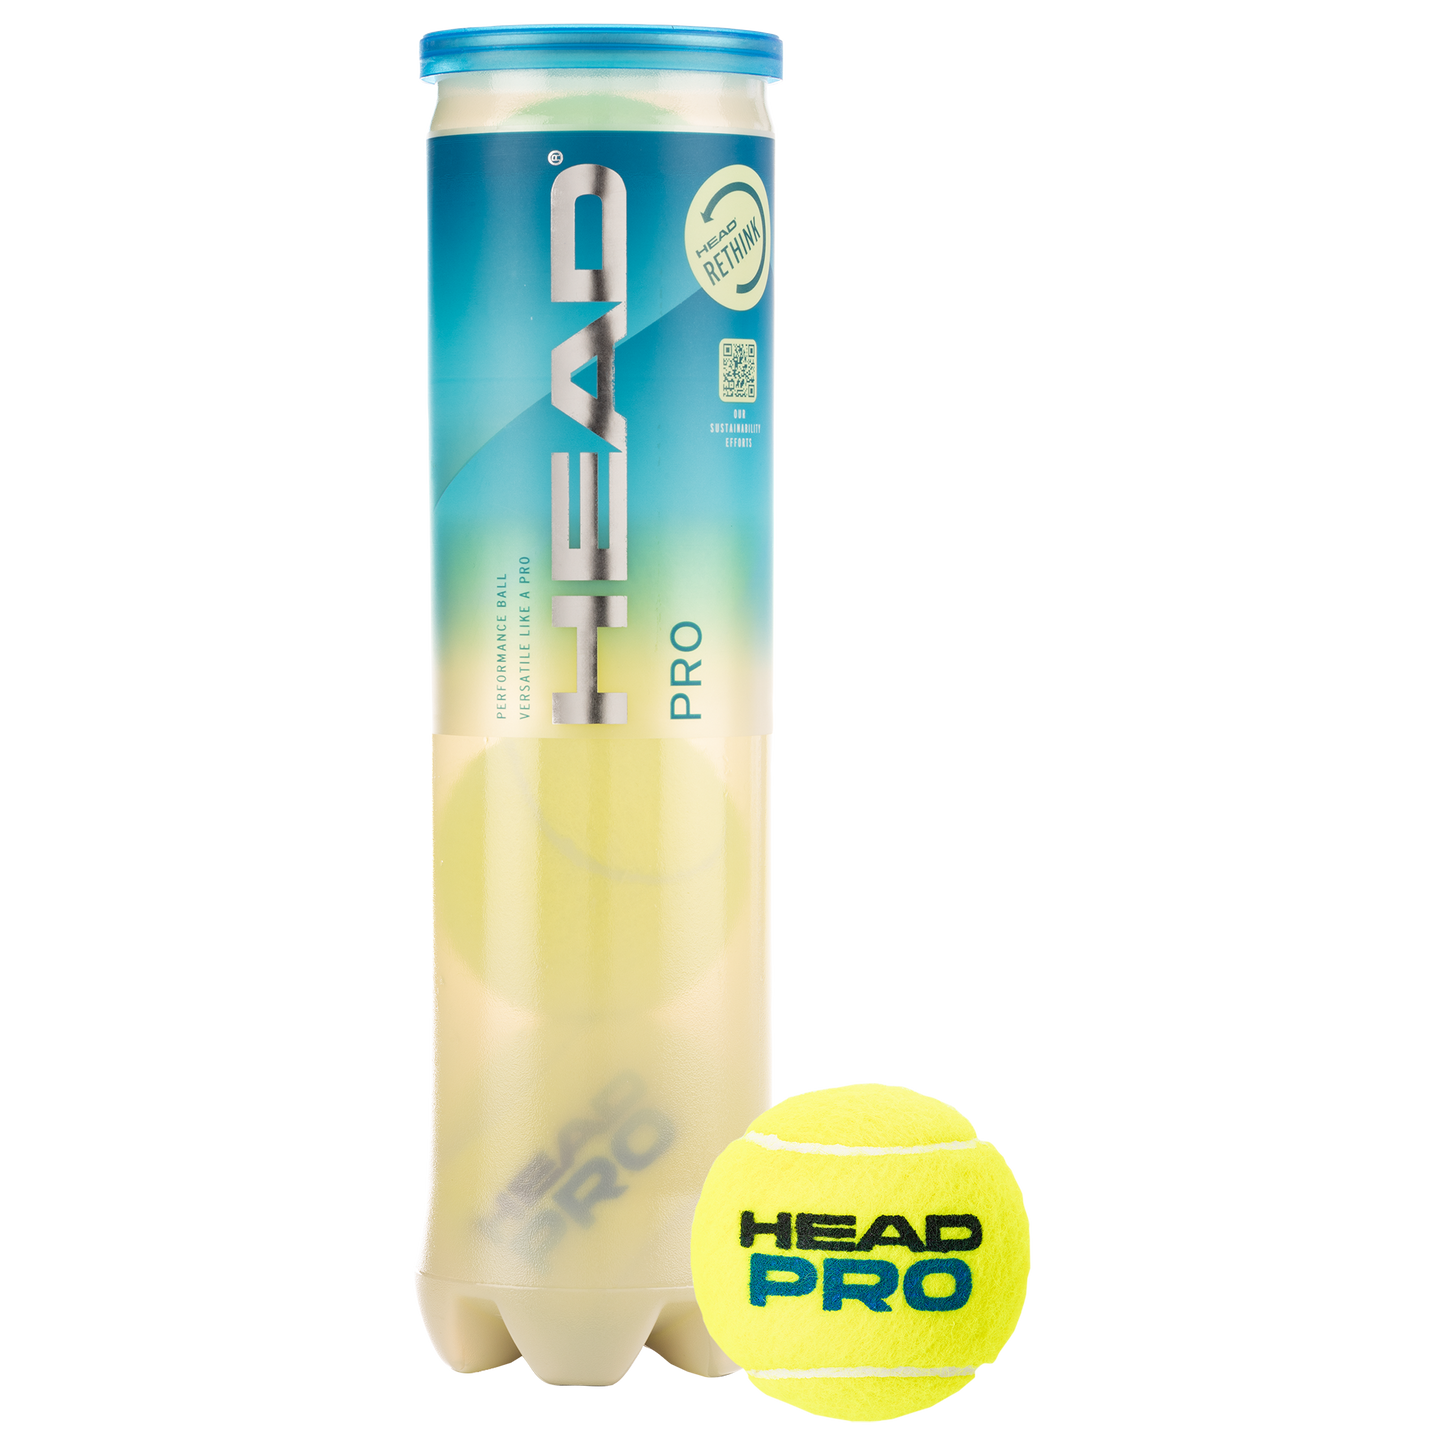 A Pack of Head Pro Tennis Balls containing 4 balls for sale at GSM Sports